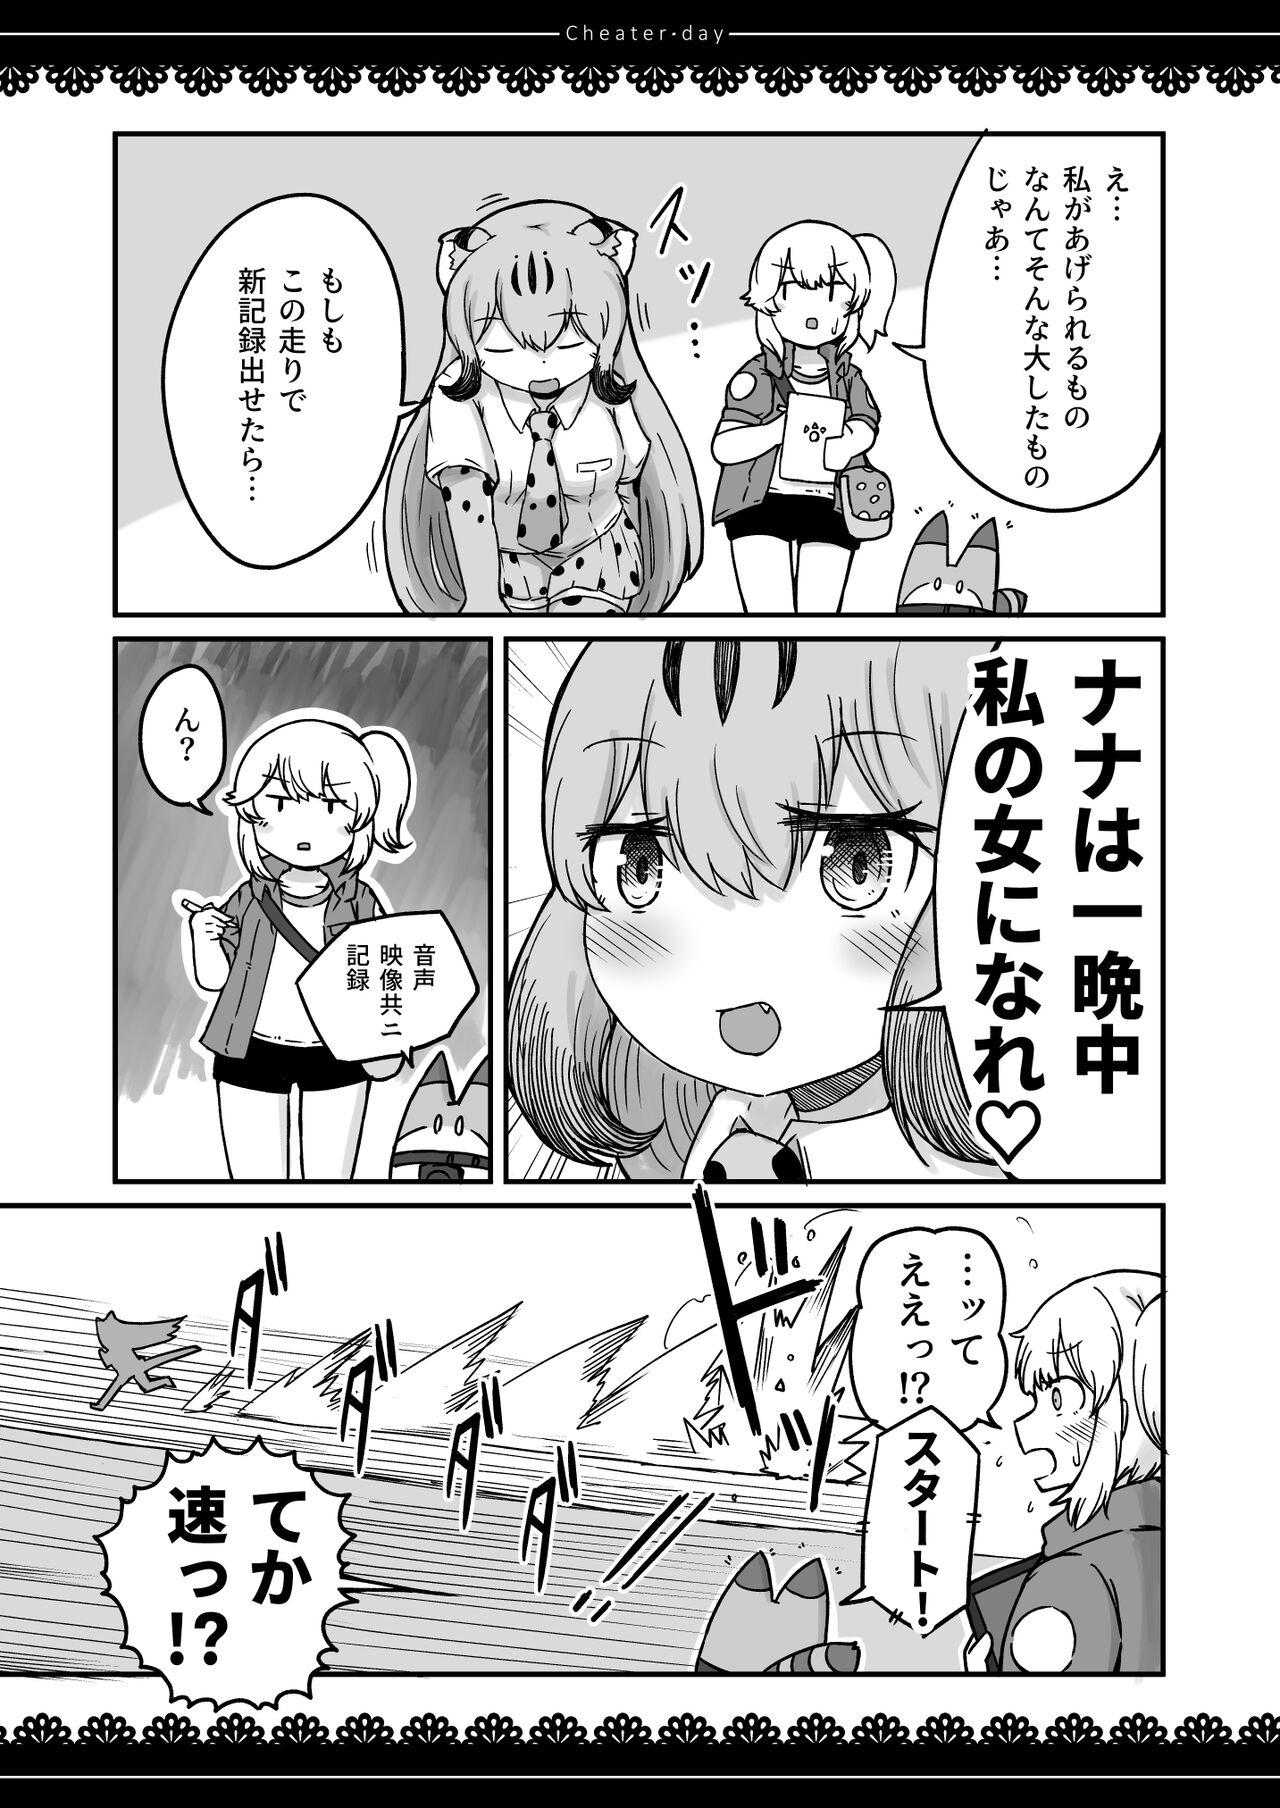 Pounded Cheater day - Kemono friends Sluts - Page 12